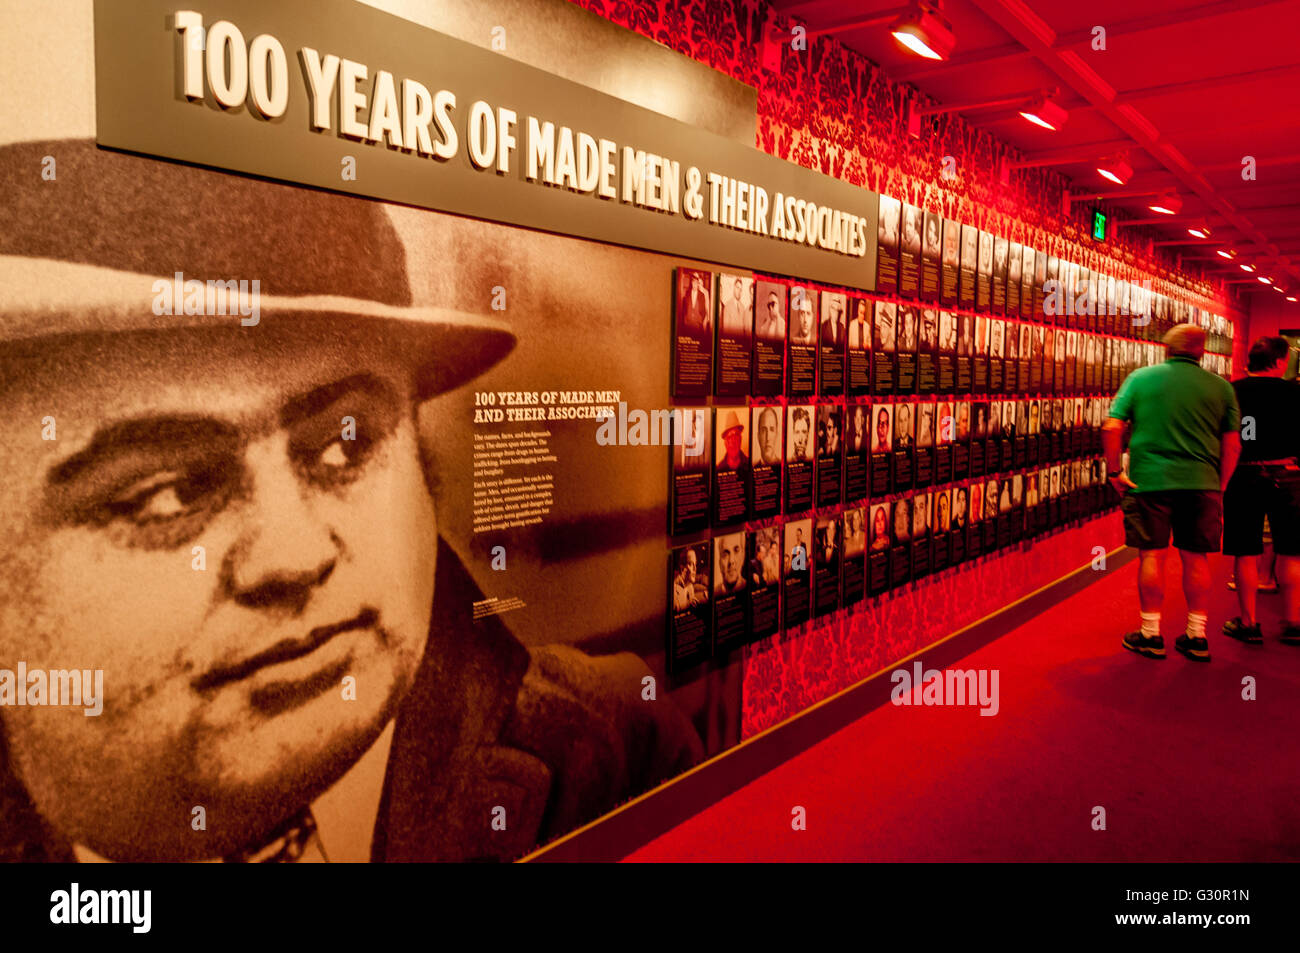 The Mob Museum of Las Vegas and 100 Years of Made Men wall w/ profiles of the most notorious mobsters an gangsters from history Stock Photo